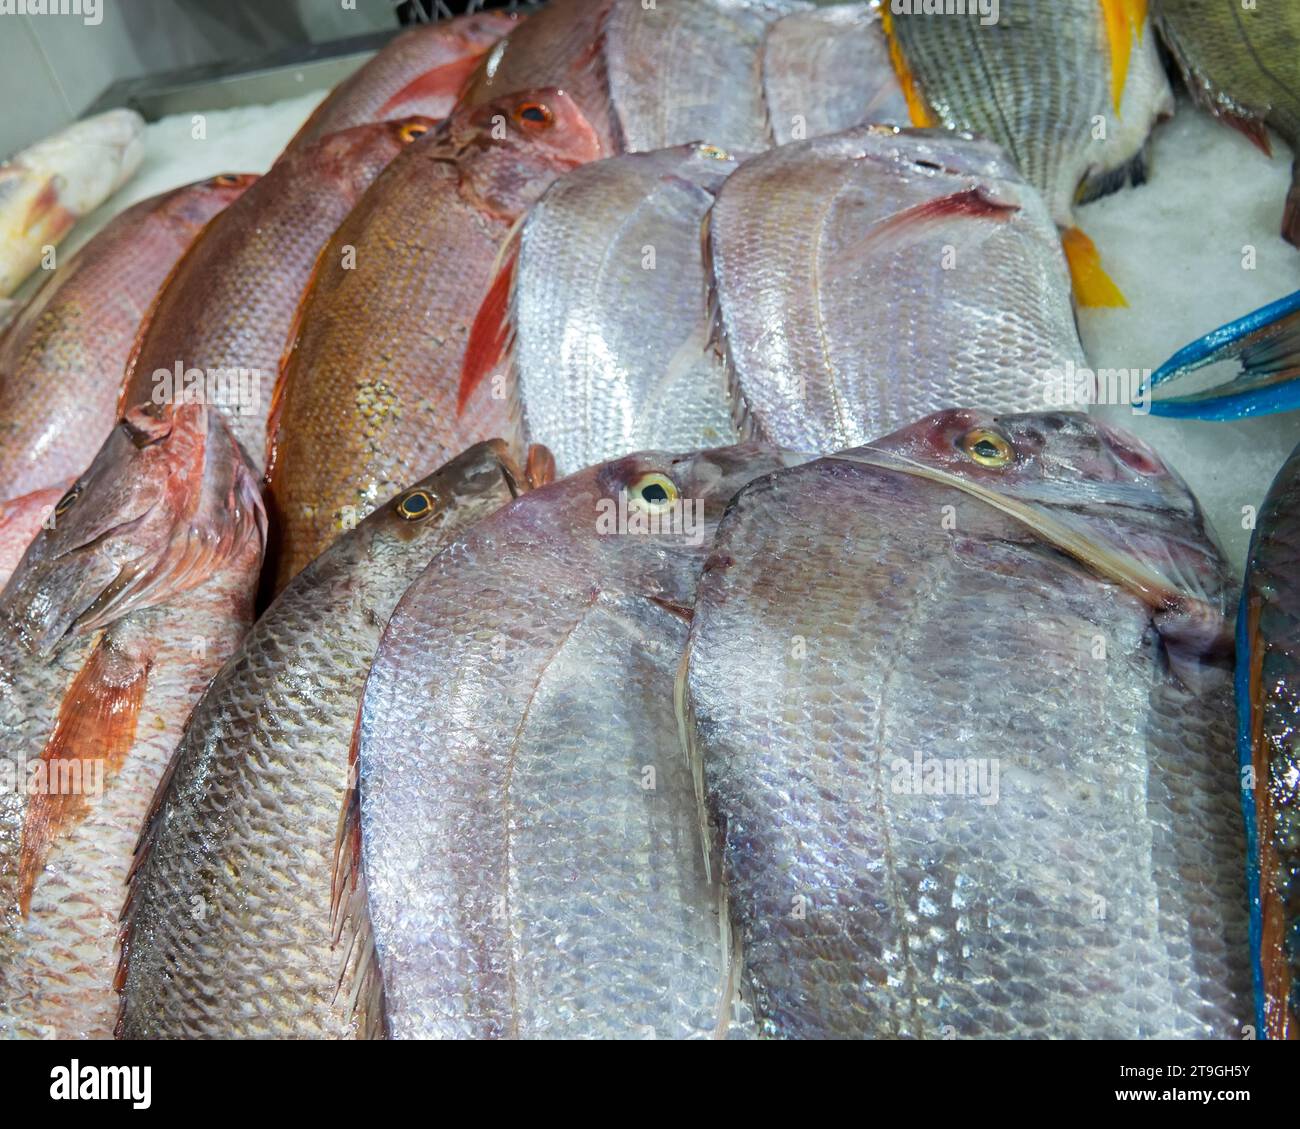 Bandar Abbas, Iran. Fish market. The fish of the Persian Gulf and the Arabian Sea are caught and sold Stock Photo